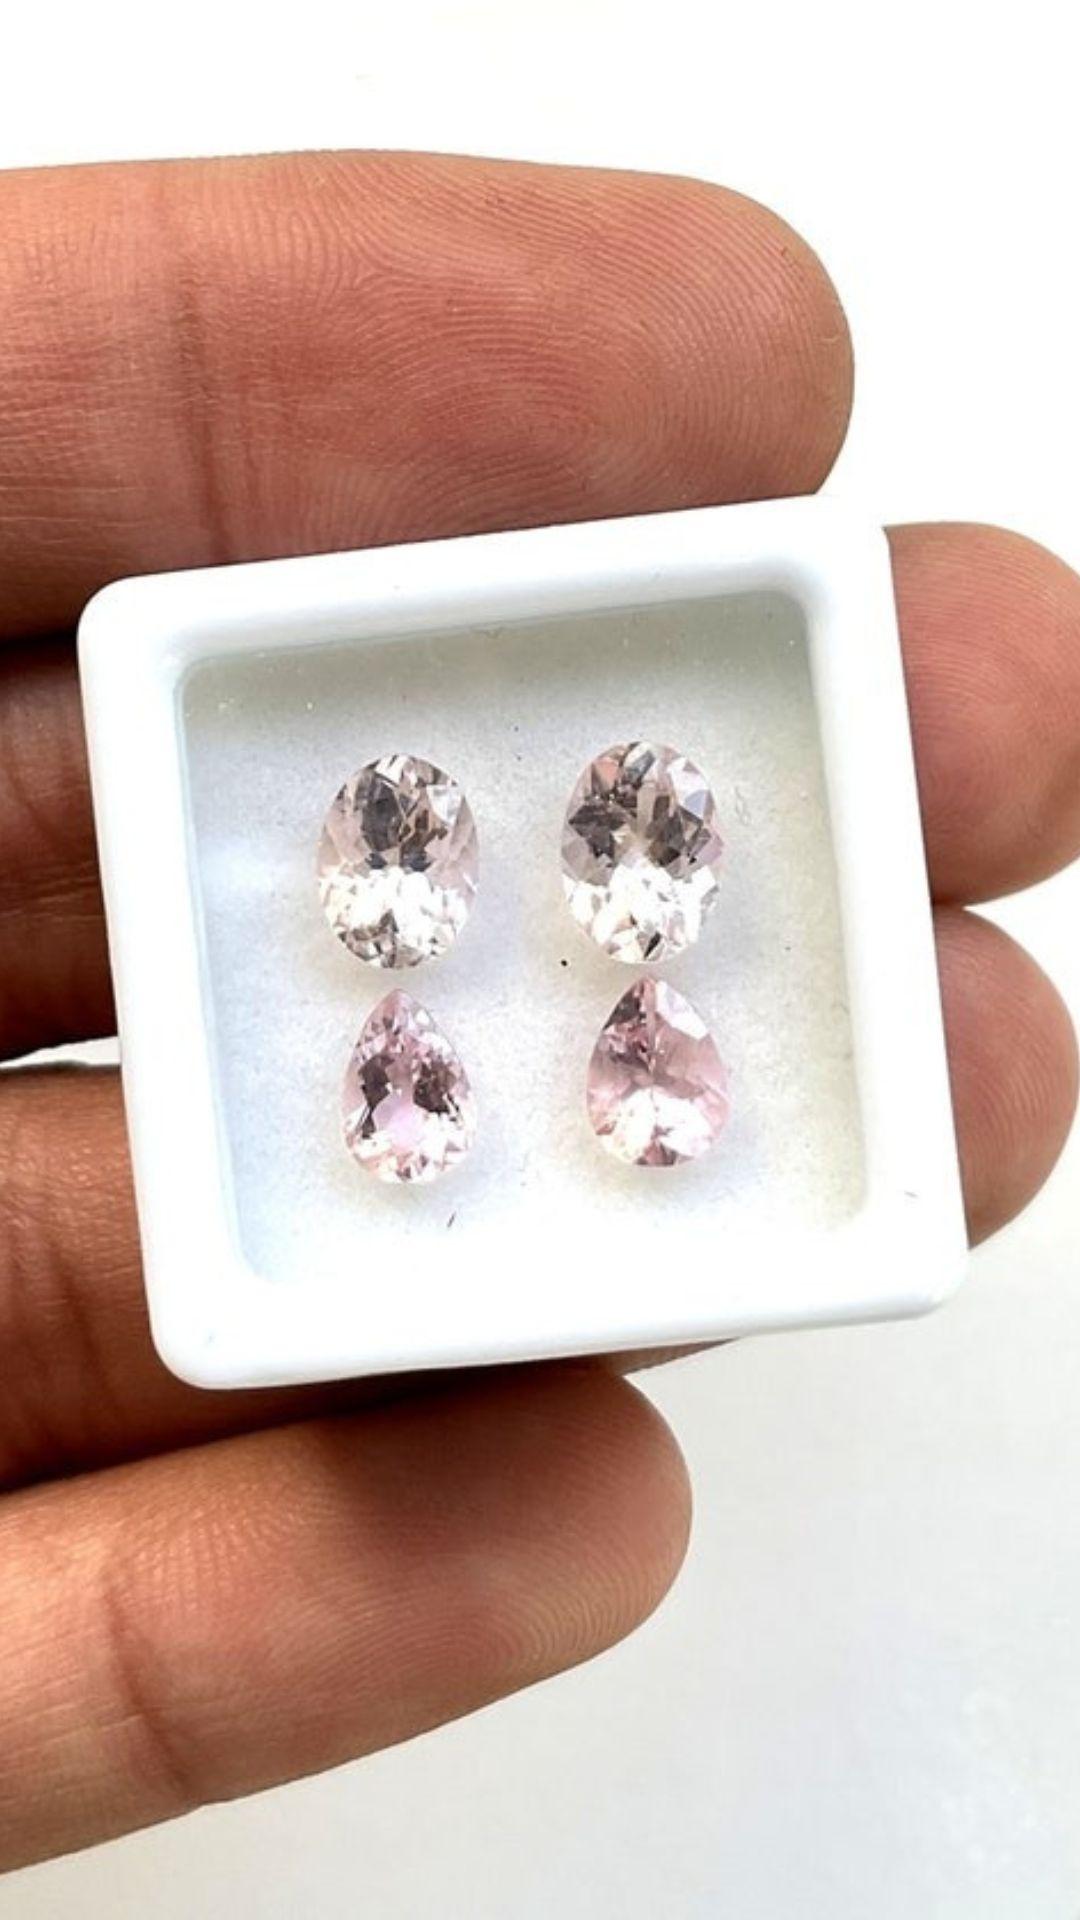 3.70 carats pink tourmaline , top quality tourmaline jewelry cut , natural tourmaline gemstone 4 pieces for jewelry

Gemstone - Tourmaline
Weight- 3.70 Carats
Shape - Oval , Pear
Size - 8x6 To 7x5 MM
Pieces - 4
Drill- Not Drilled

Prismatic Gems (: